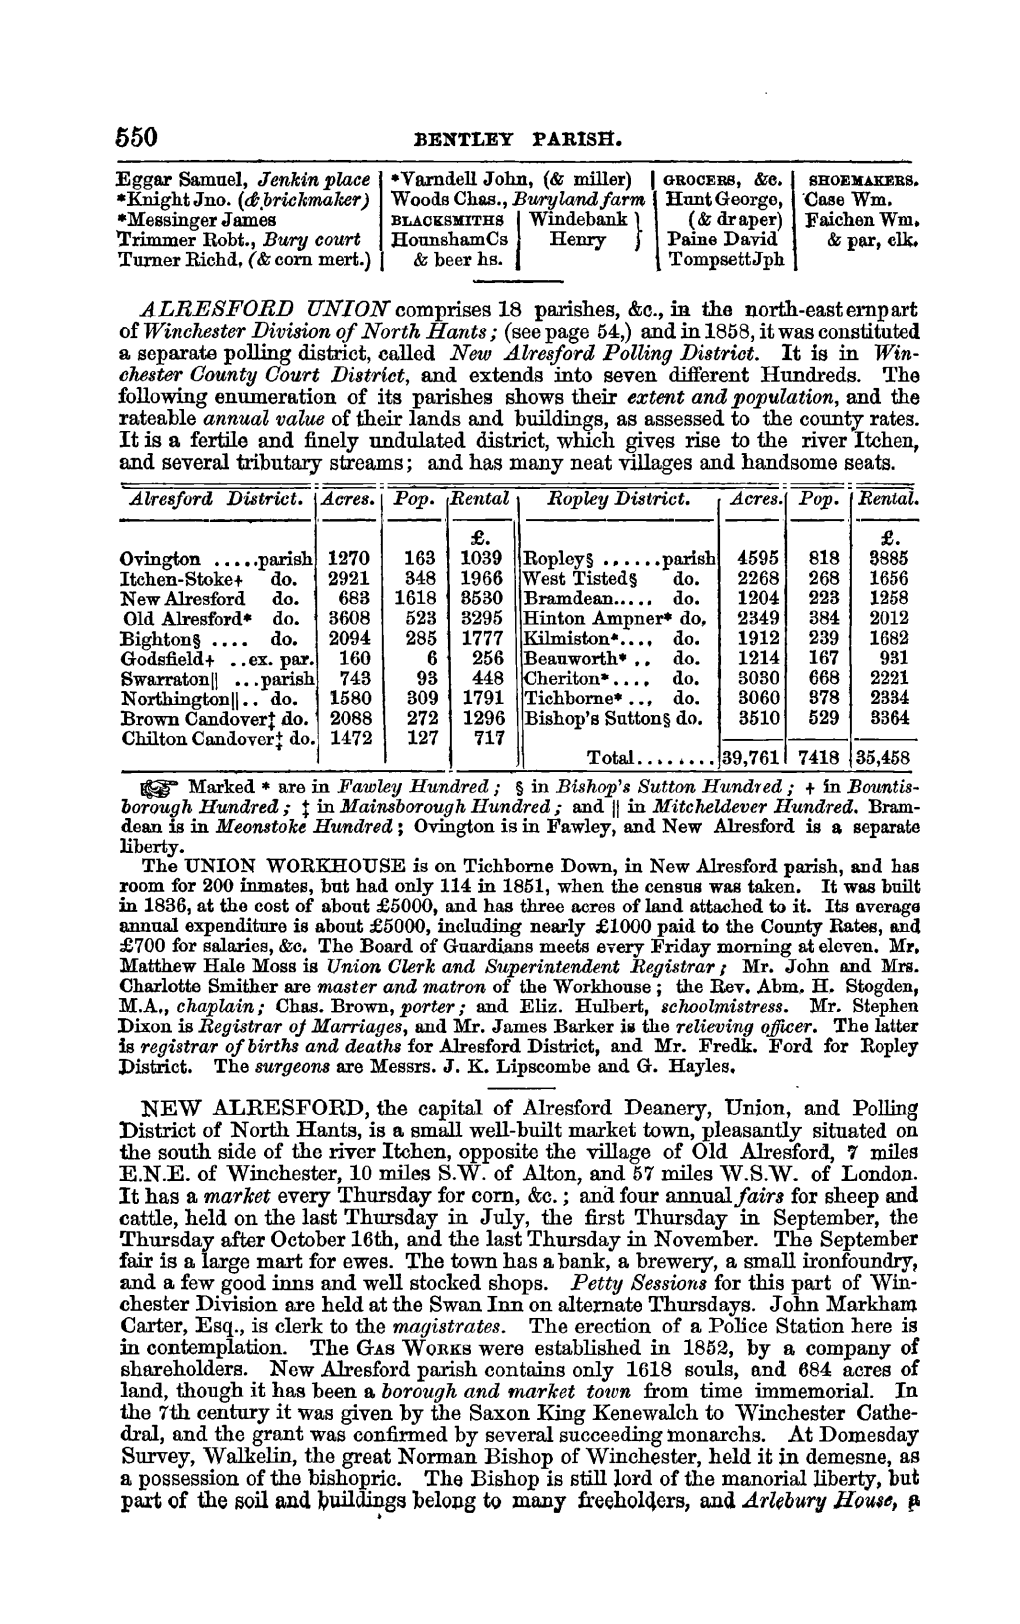 Part of Winchester Division of North Hants; (See Page 54,) and in 1858, It Was Constituted a Separate Polling District, Called New Alresford Polling District